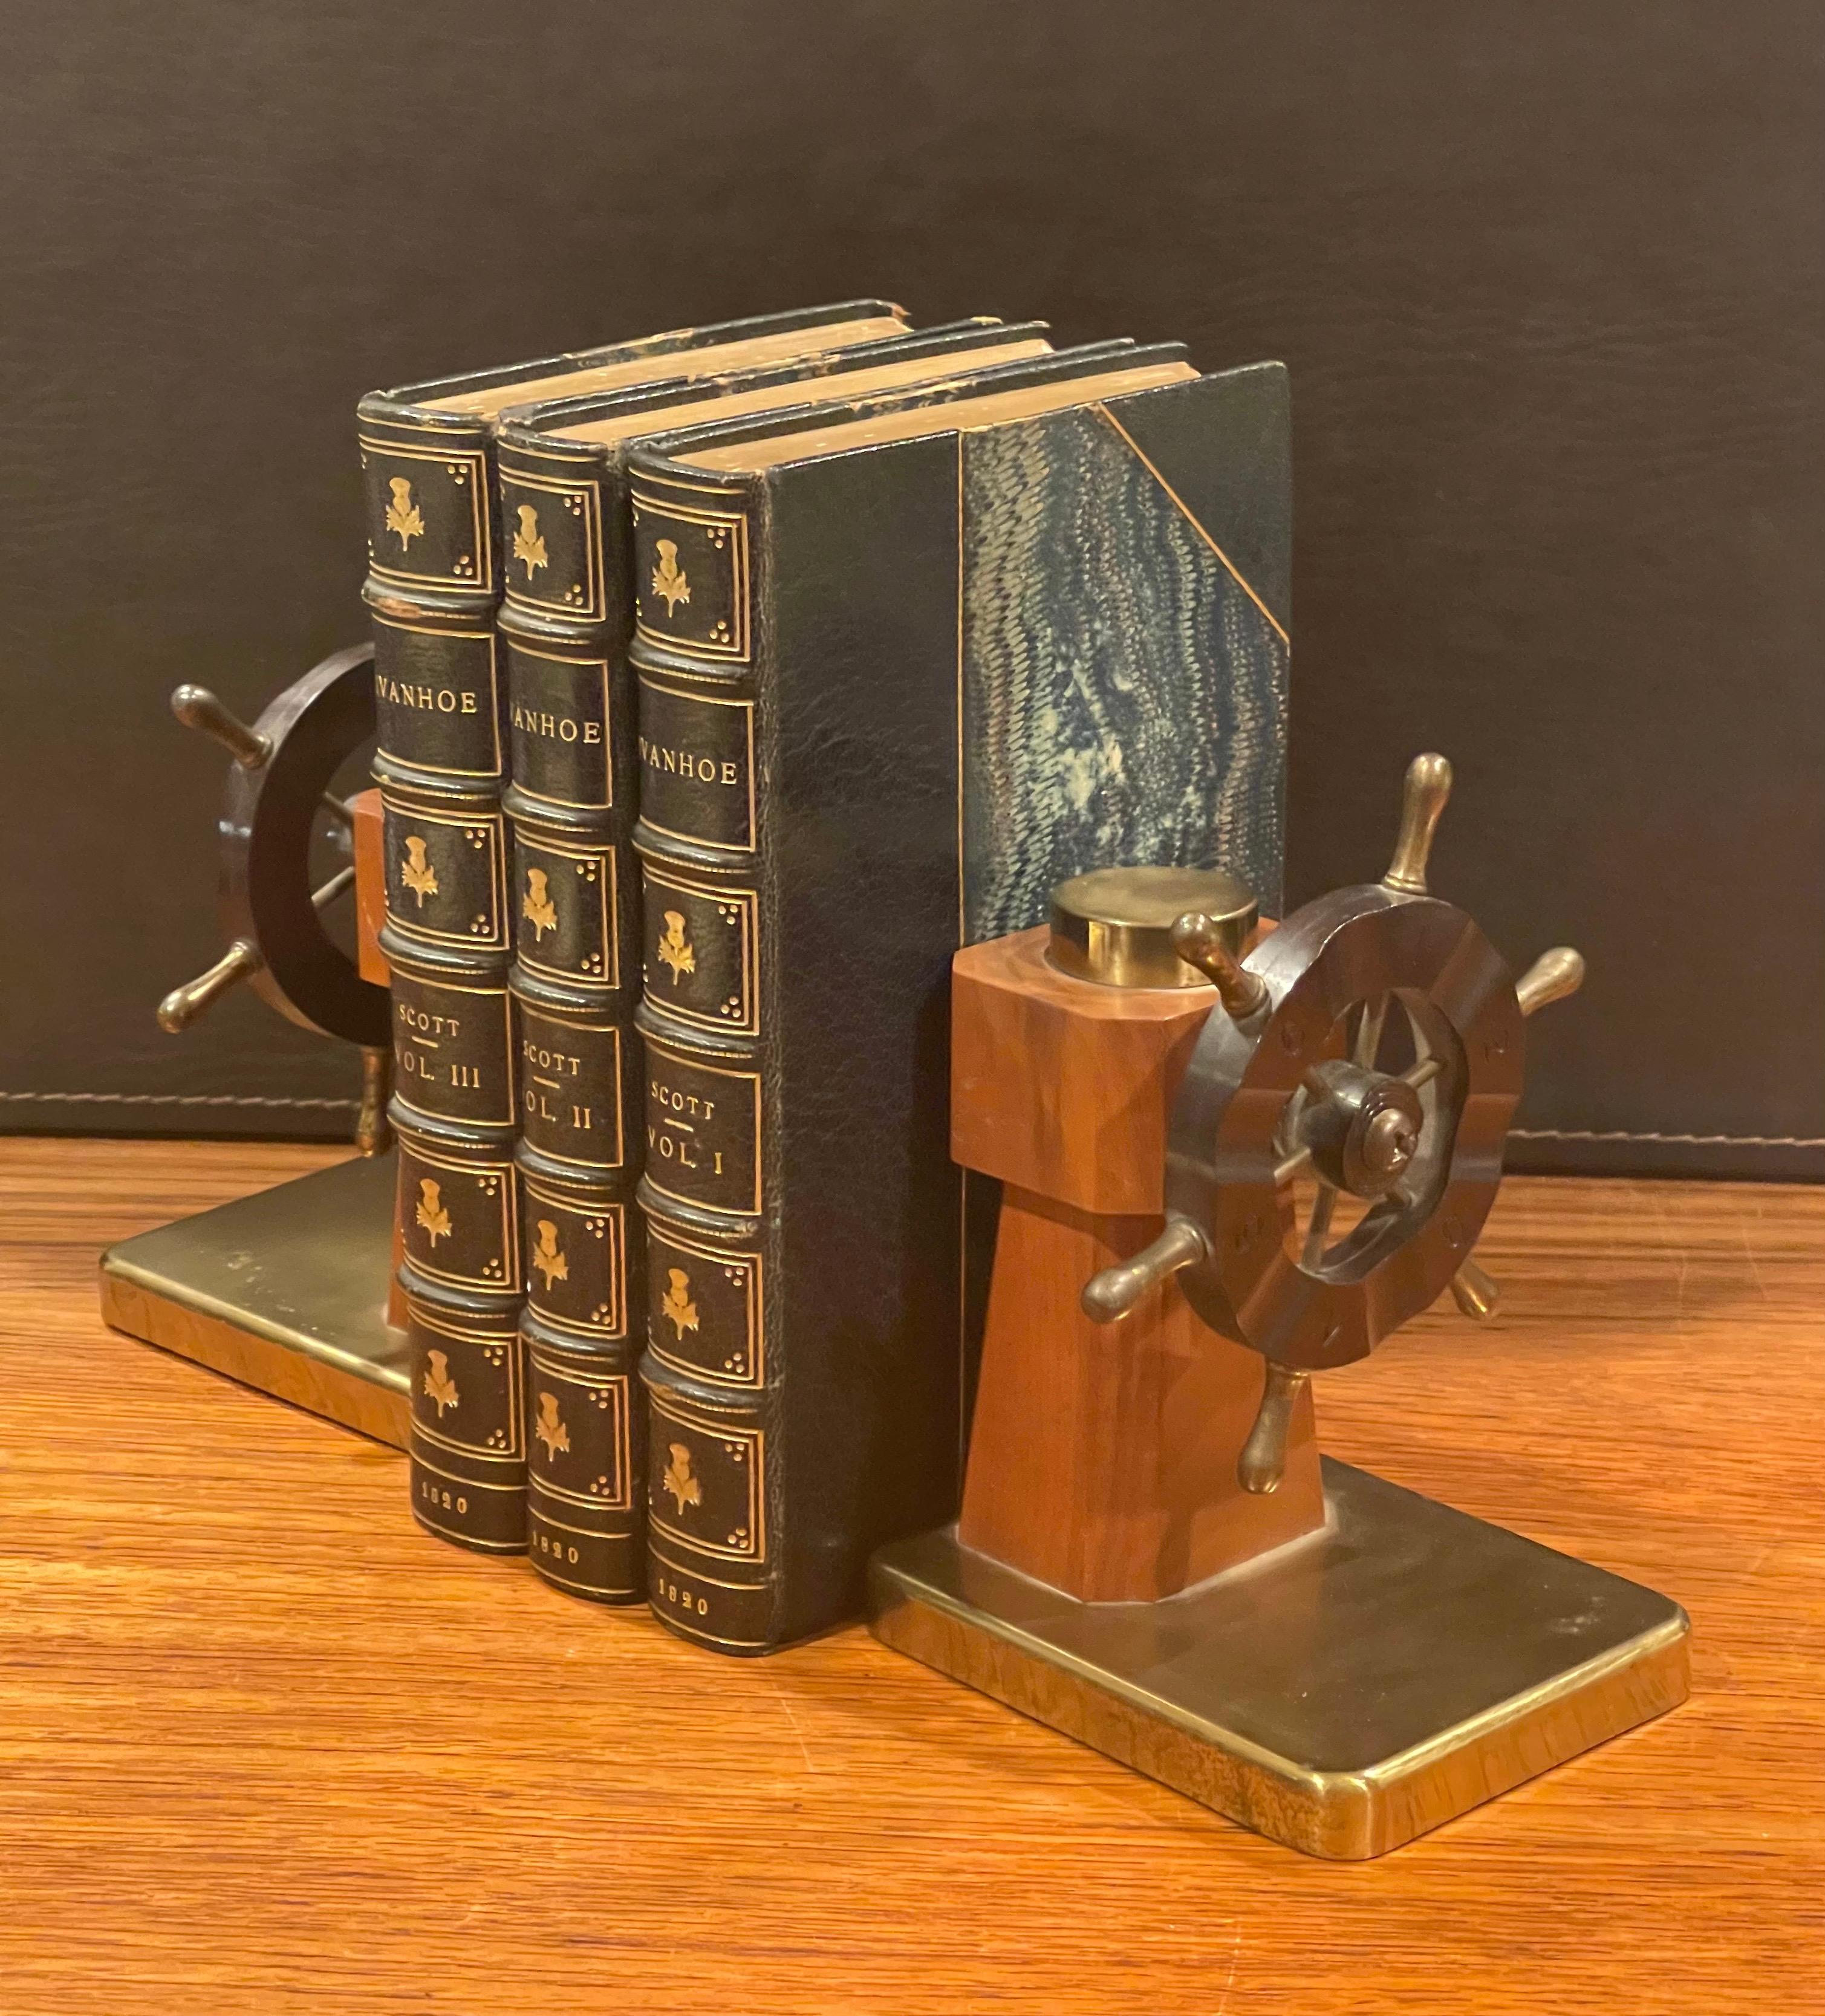 A very nice pair of Art Deco ship's wheel bookends by Walter Von Nessen for Chase & Co., circa 1930s. The bookends are made of walnut, brass and bakelite; they depict the captain’s wheel of a ship. The base, spokes, and wheel handles are solid